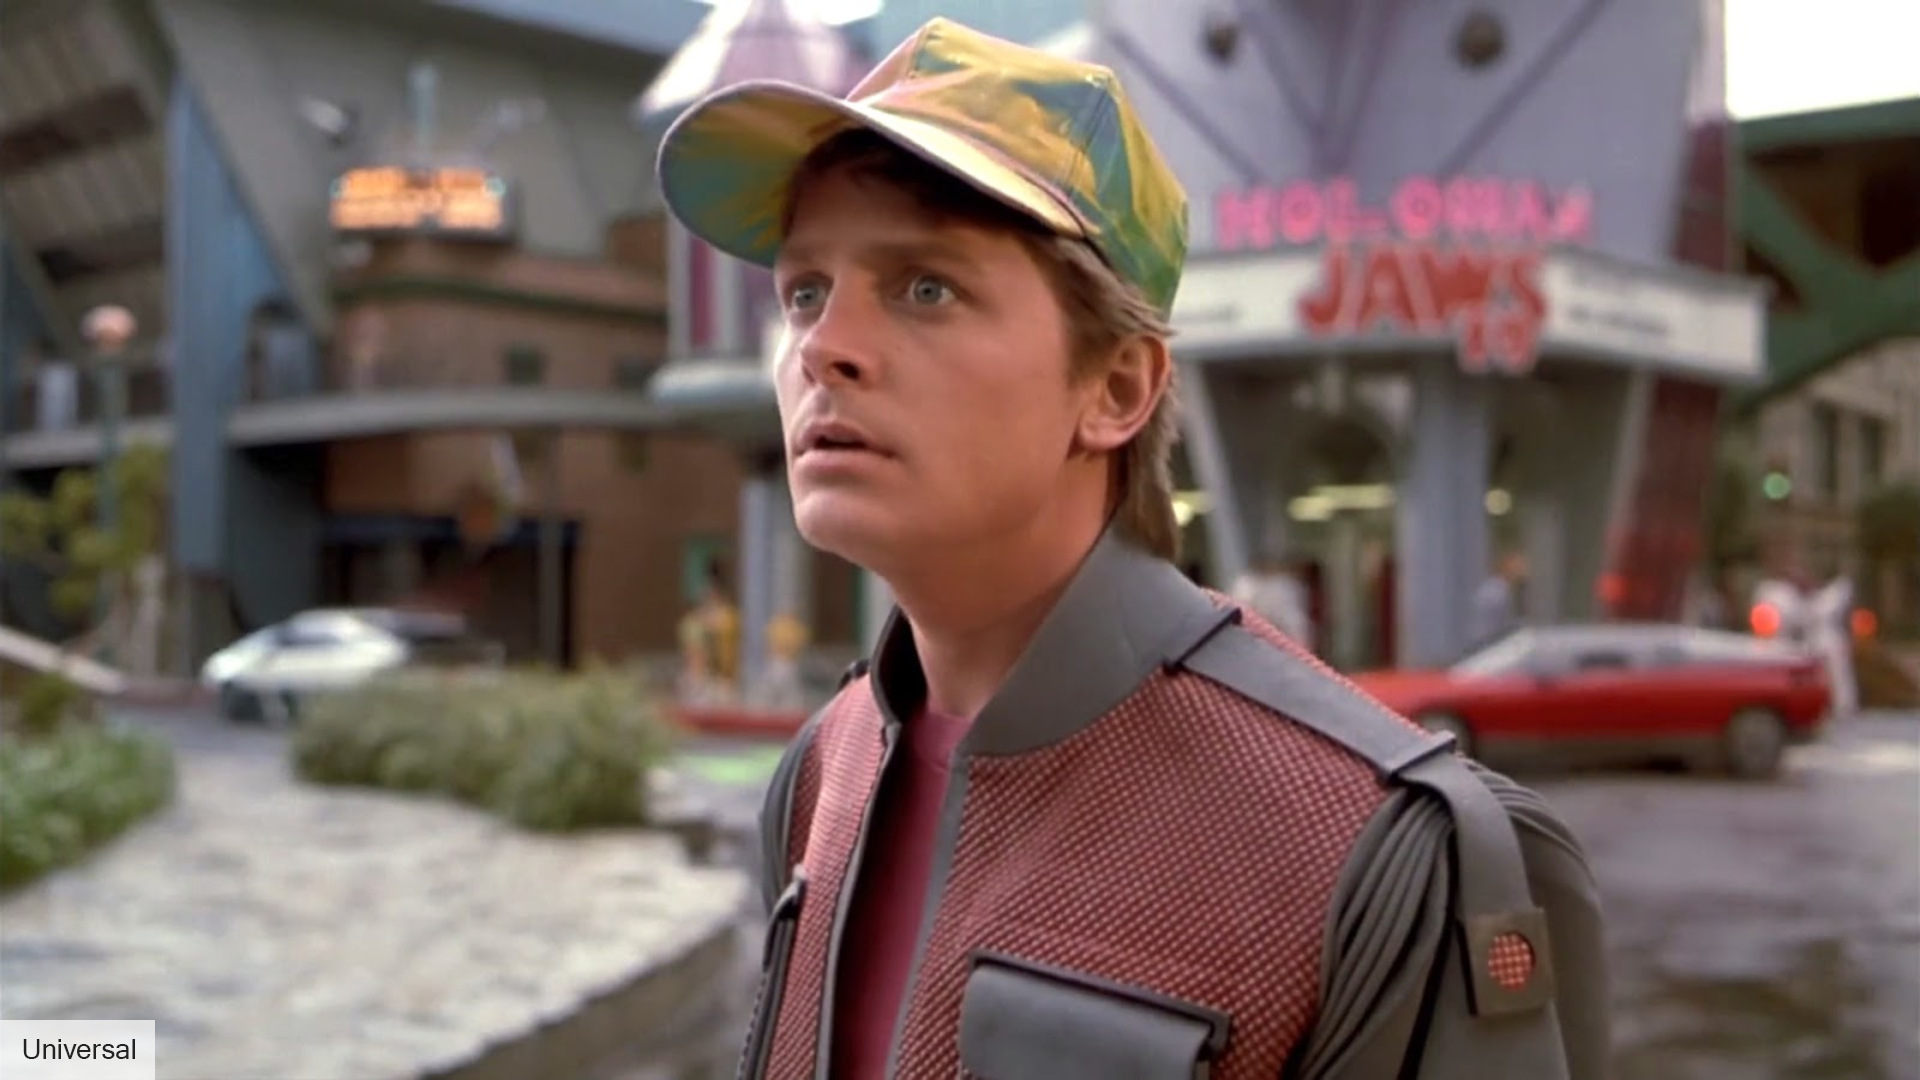 Back To The Future (1985) Theatrical Trailer - Michael J. Fox